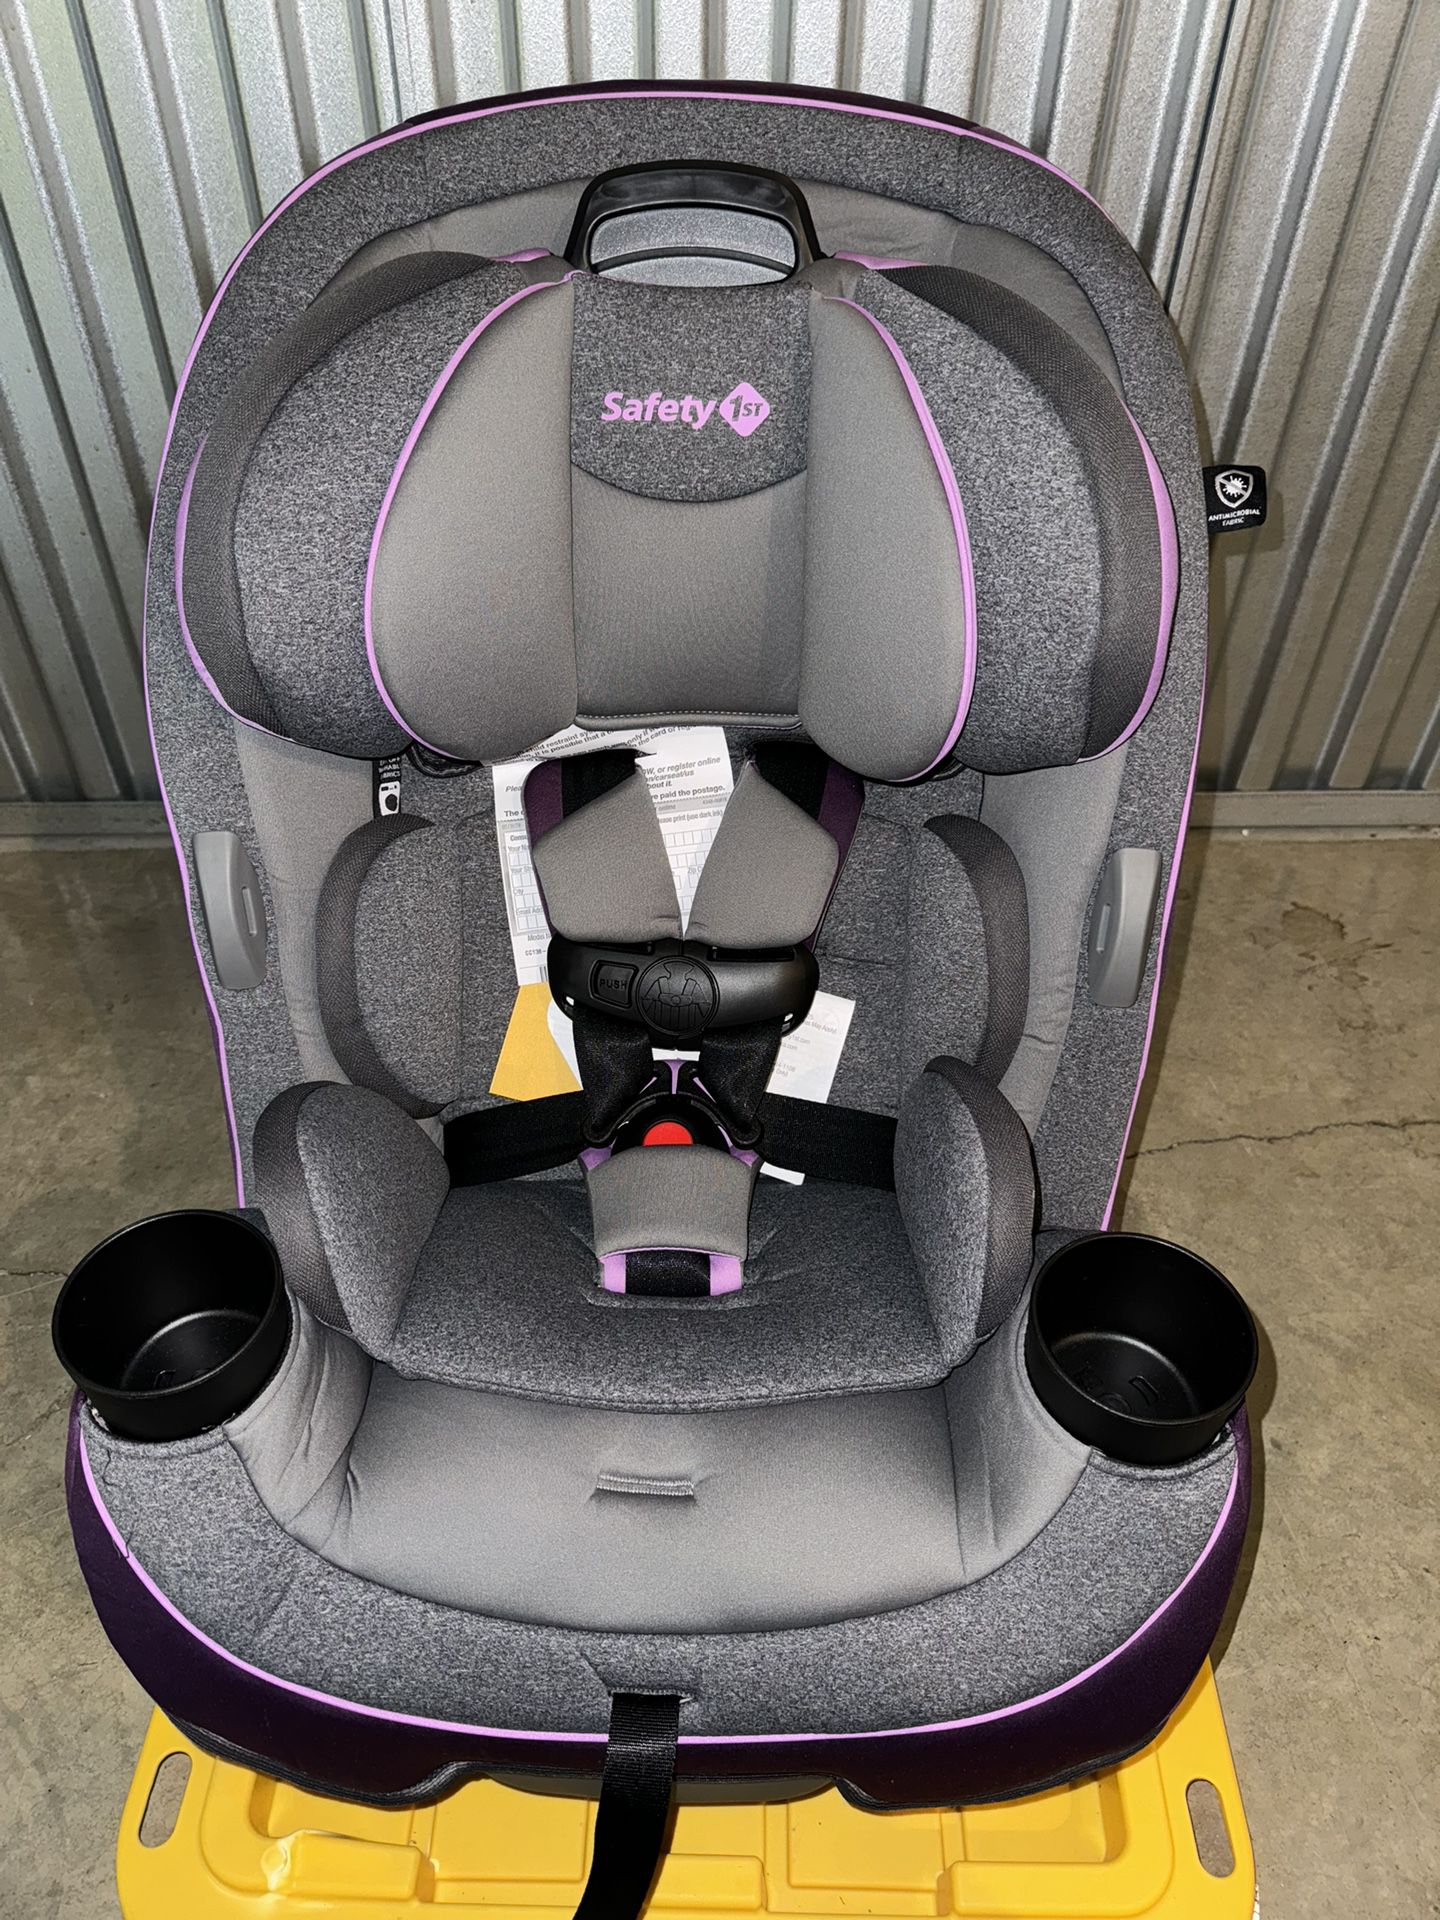 Safety1st Grow and Go All-in-1 Convertible Car Seat - Sugar Plum Pop